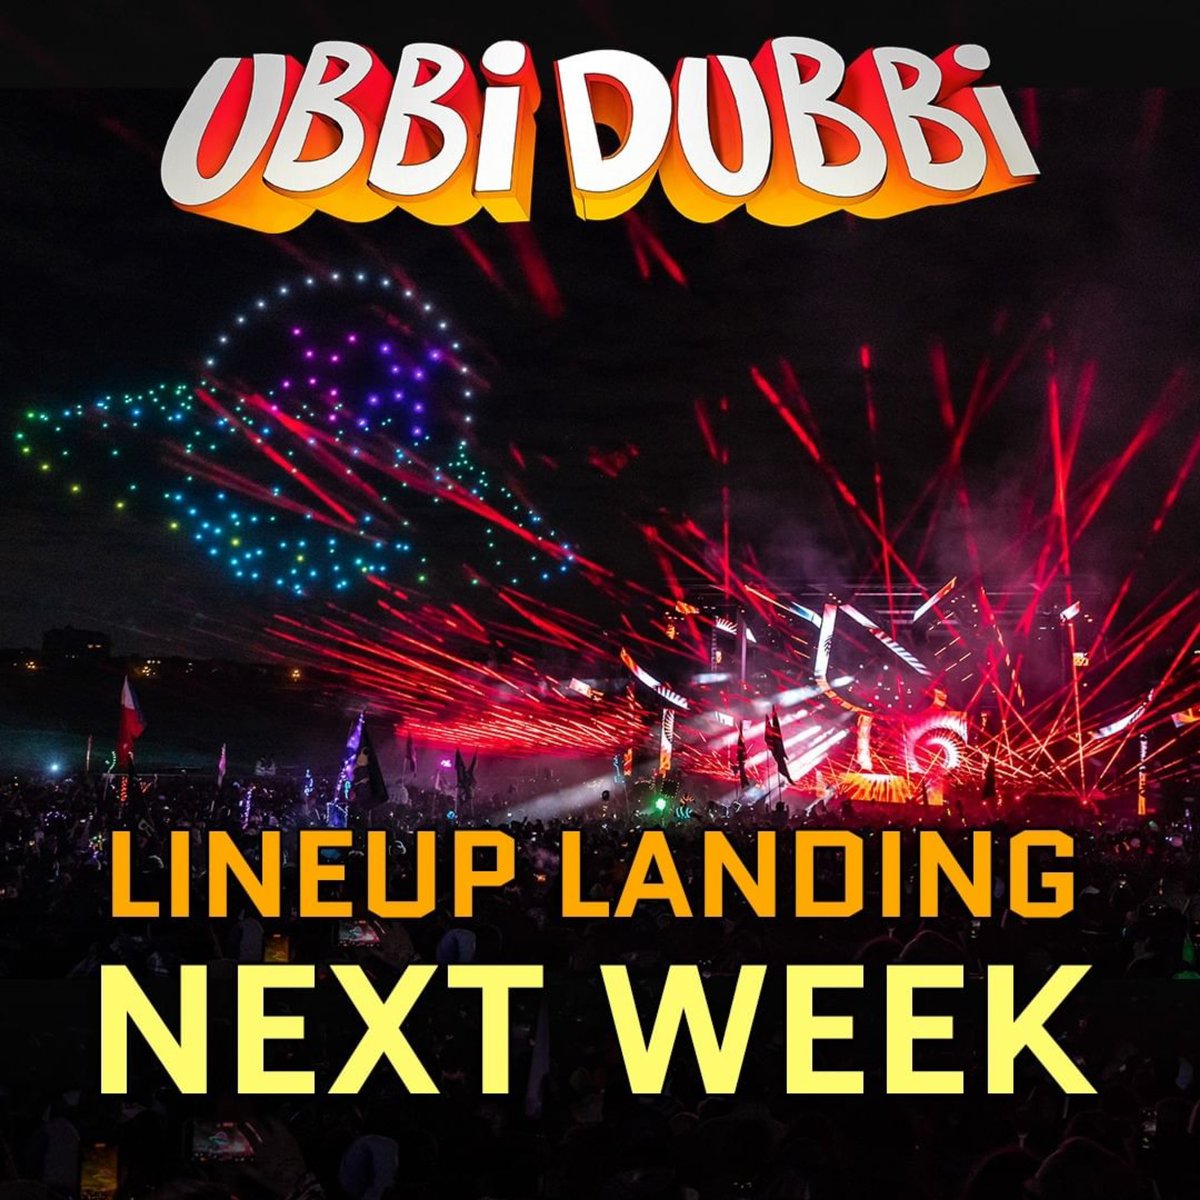 Ubbi Dubbi Festival lineup is dropping next week! Who do you want to see on the lineup? @UbbidubbiFest Use Promo Code - TEXASEDM 🪩 Passes → bit.ly/ubbidubbi24